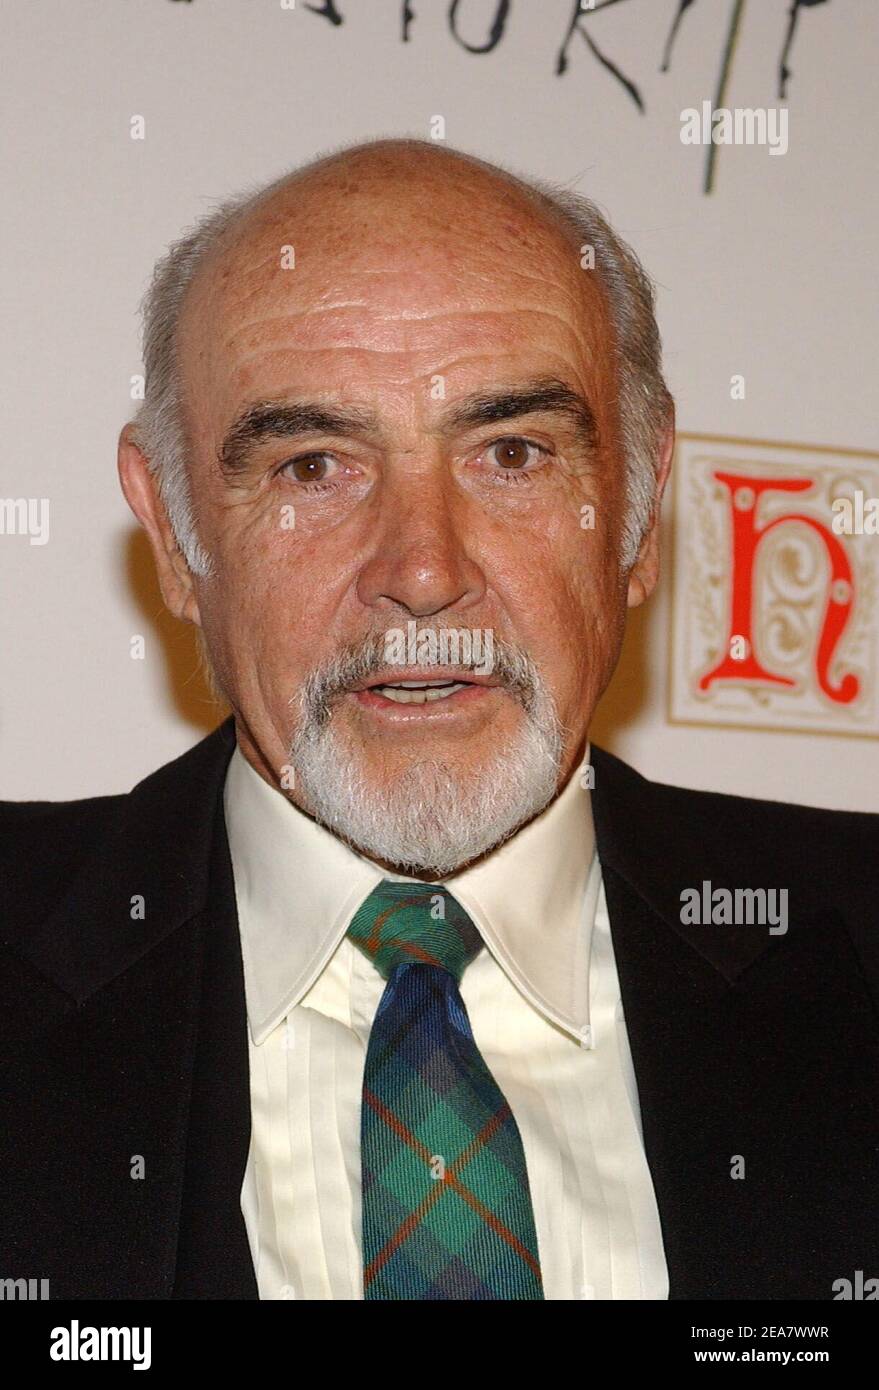 Sir Sean Connery arrives at the Dressed To Kilt party, held at Sotheby's in New York, on Monday, April 5, 2004. (Pictured : Sean Connery). Photo by Nicolas Khayat/ABACA. Stock Photo